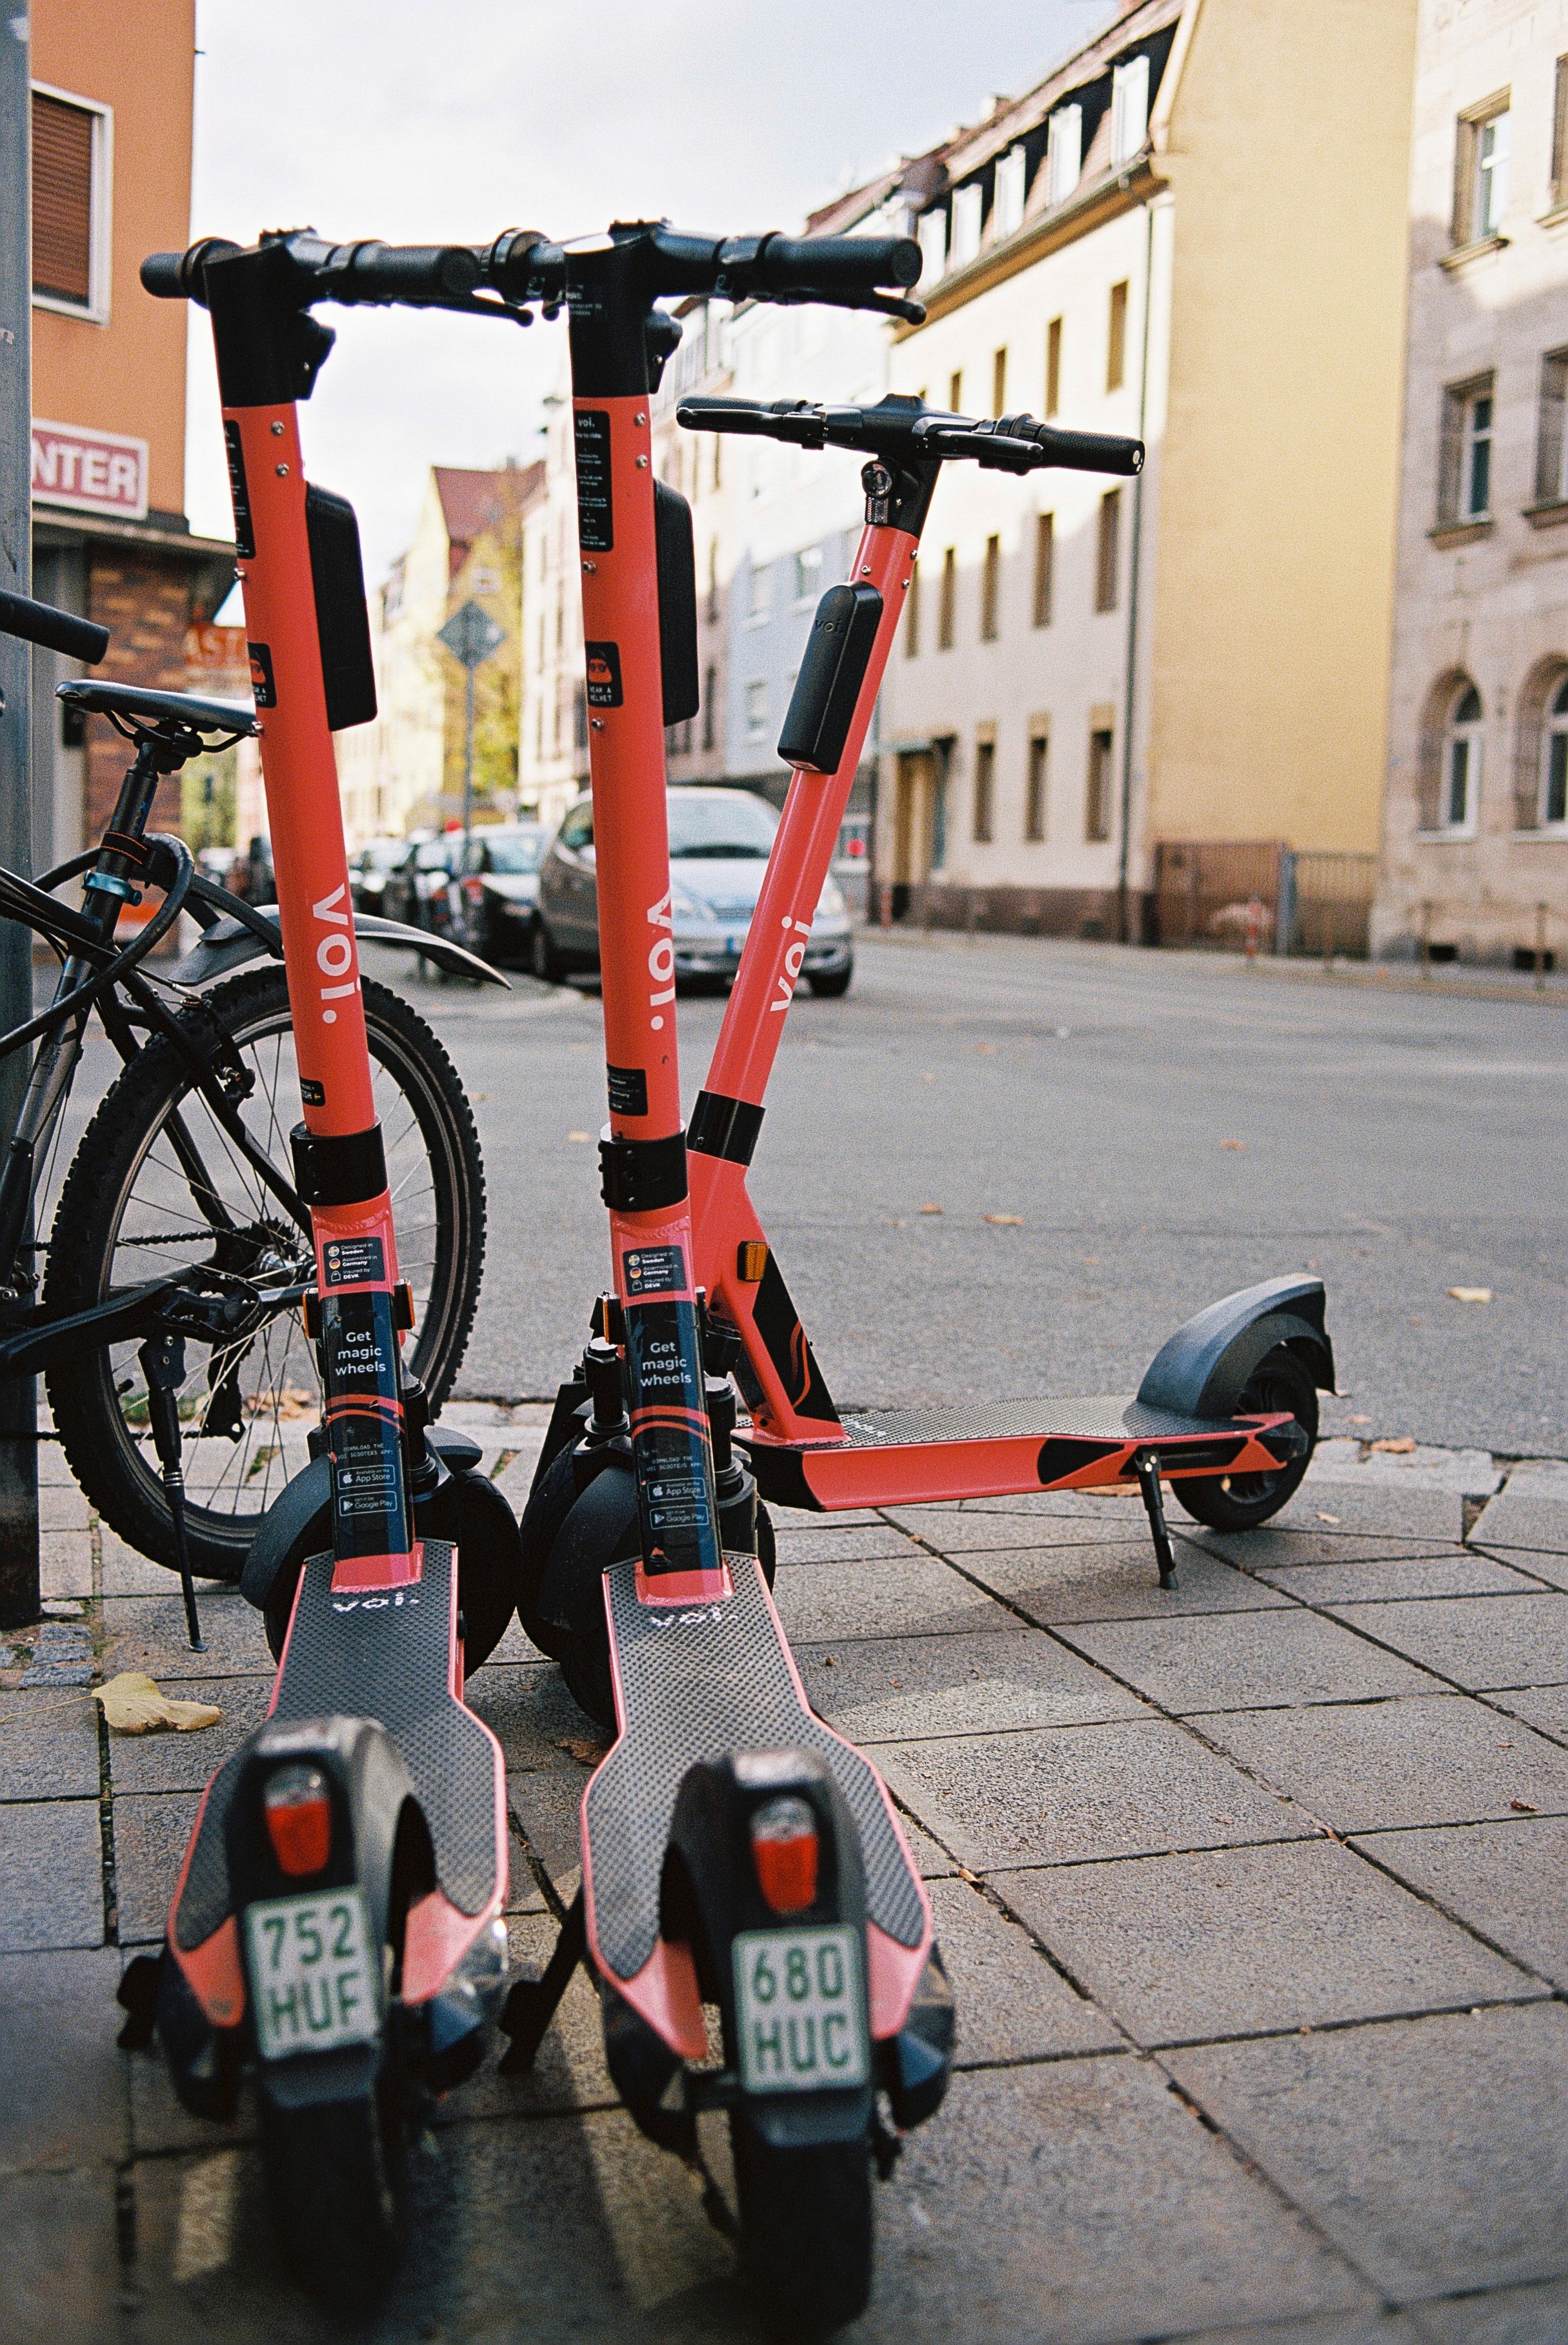 Stockholm has a with e-scooters – All